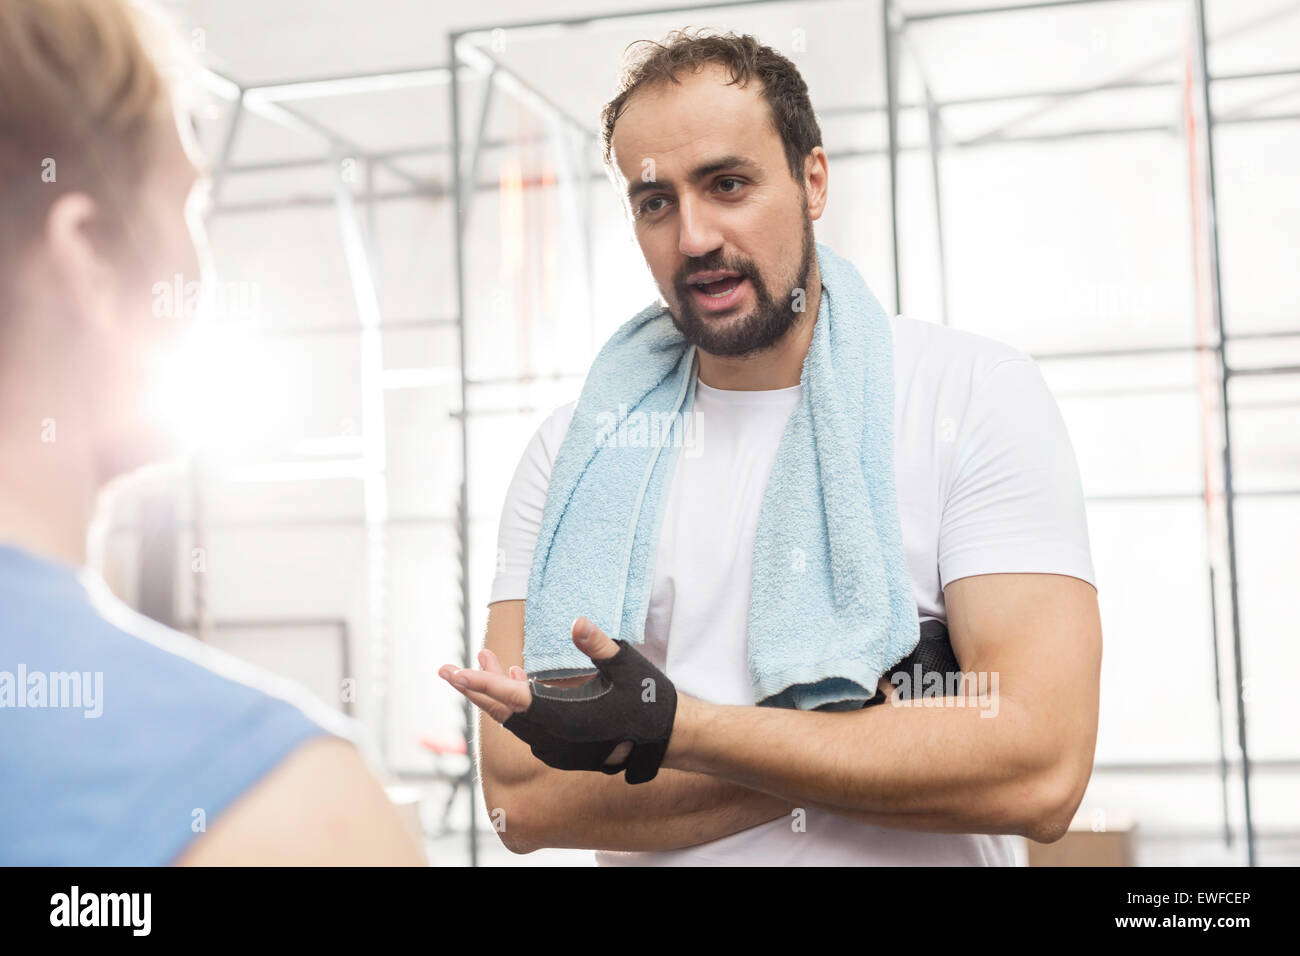 Man talking to male friend in crossfit gym Stock Photo